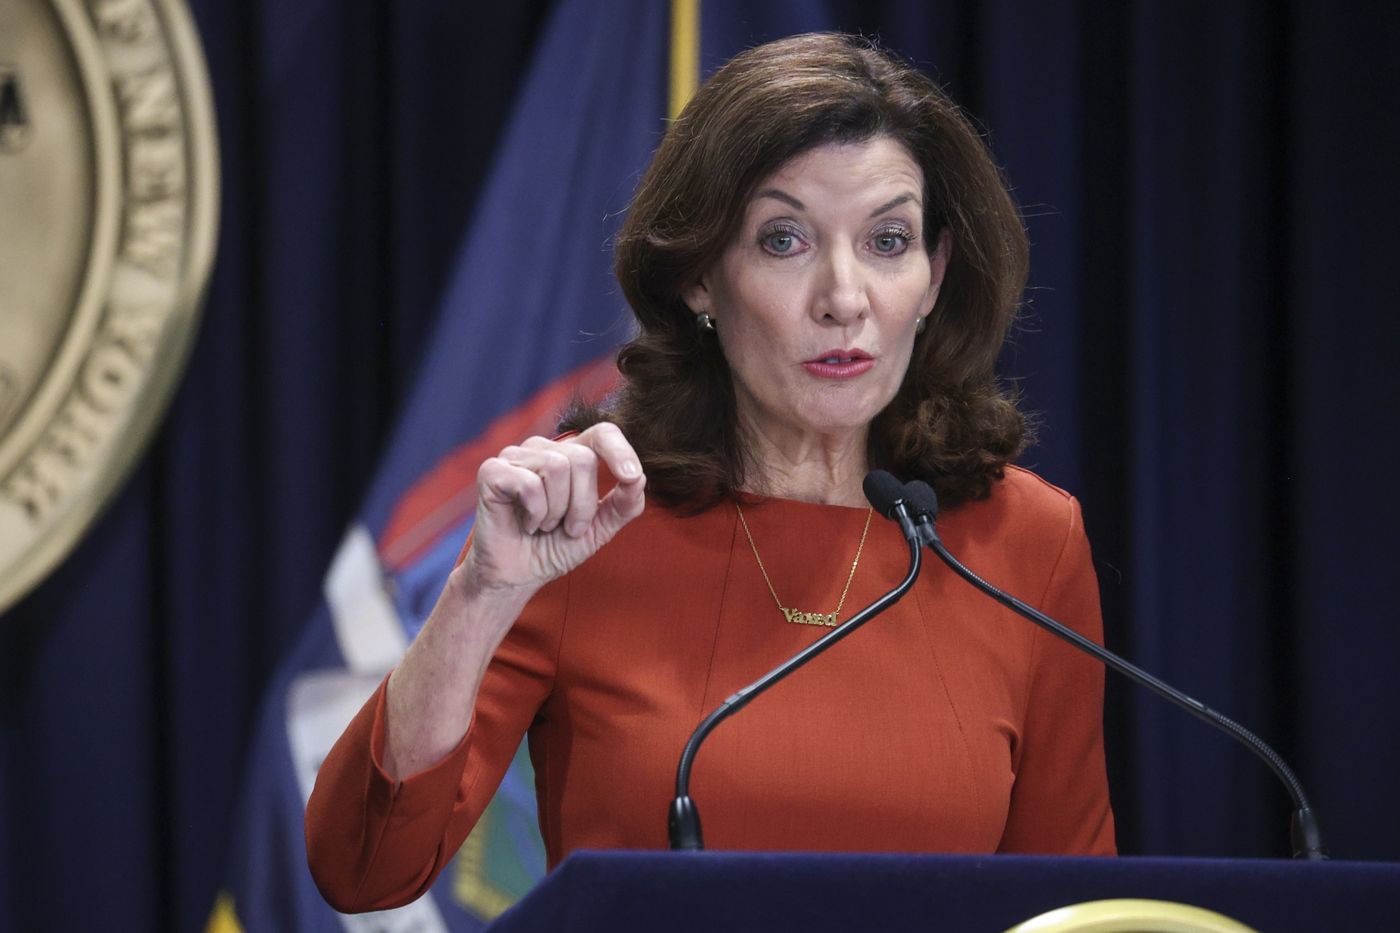 Hochul supports Biden's potential executive action on immigration